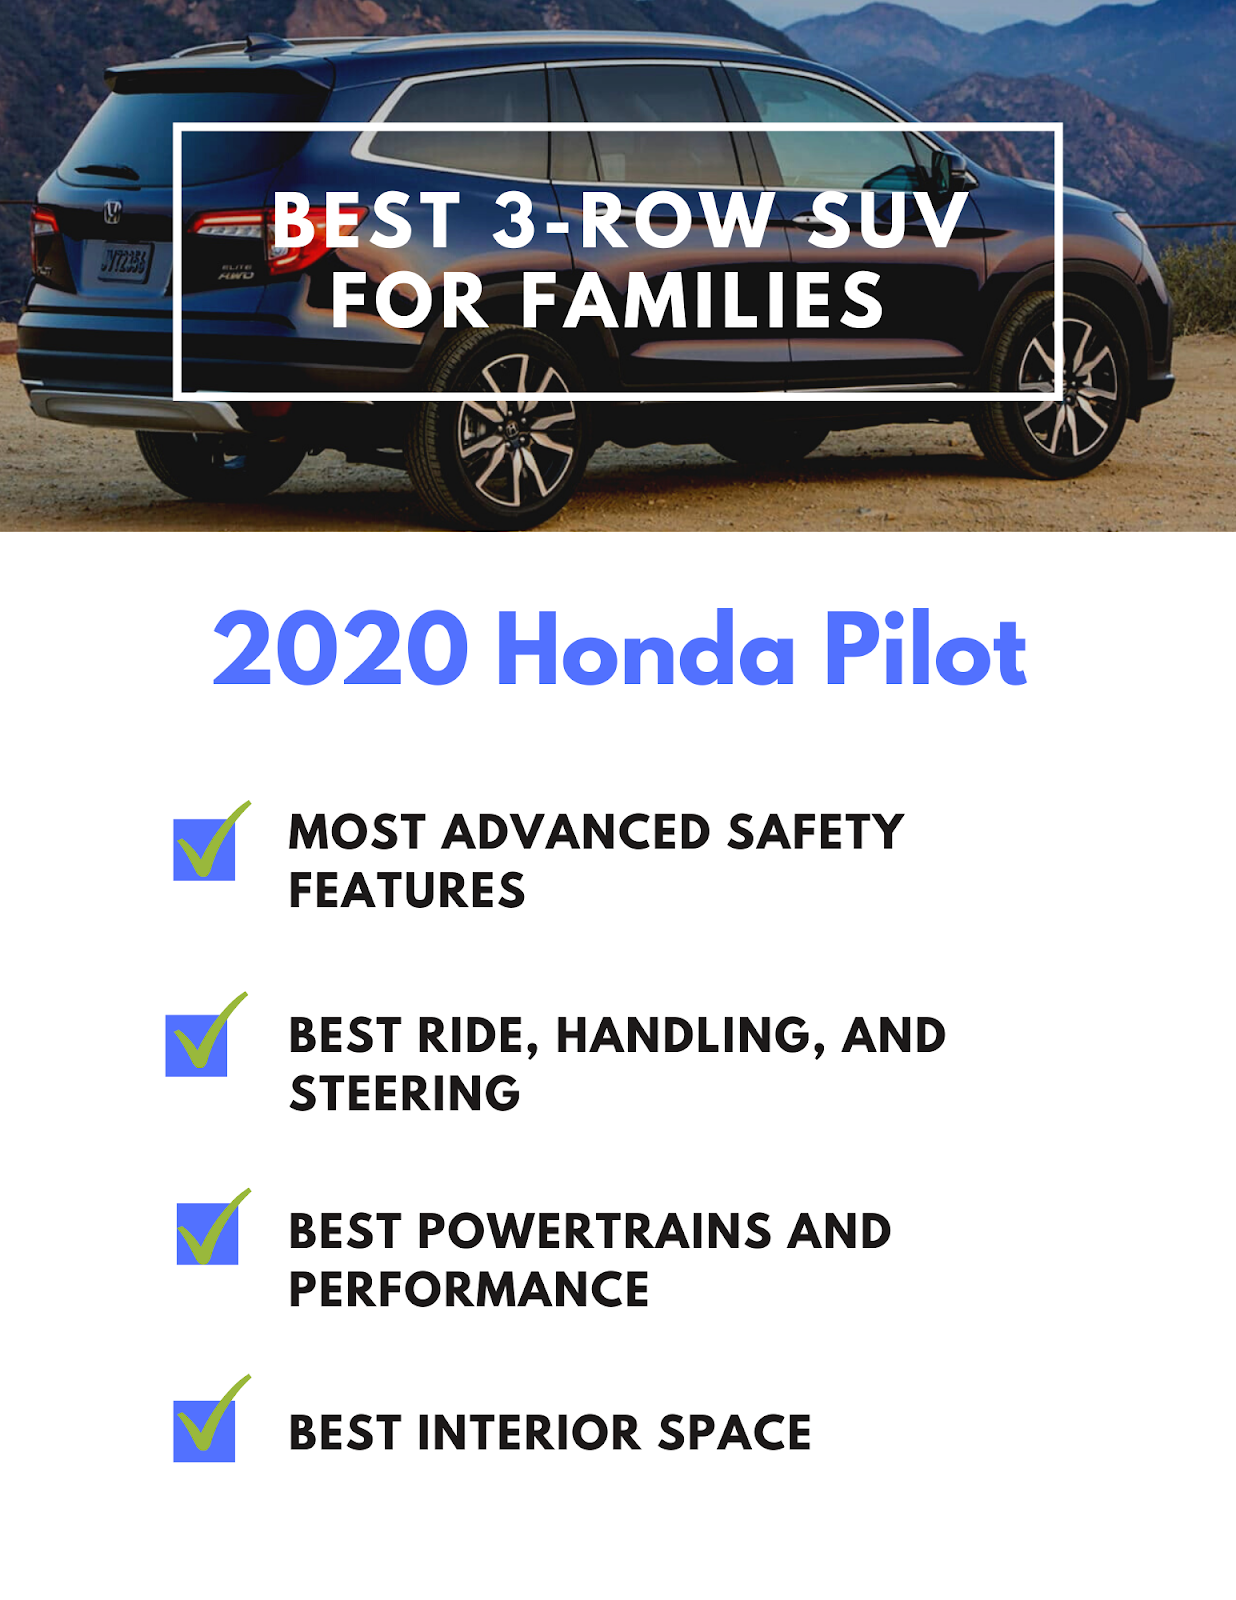 Honda Pilot has advanced safety features, ride, handling, steering, powertrain and performance!